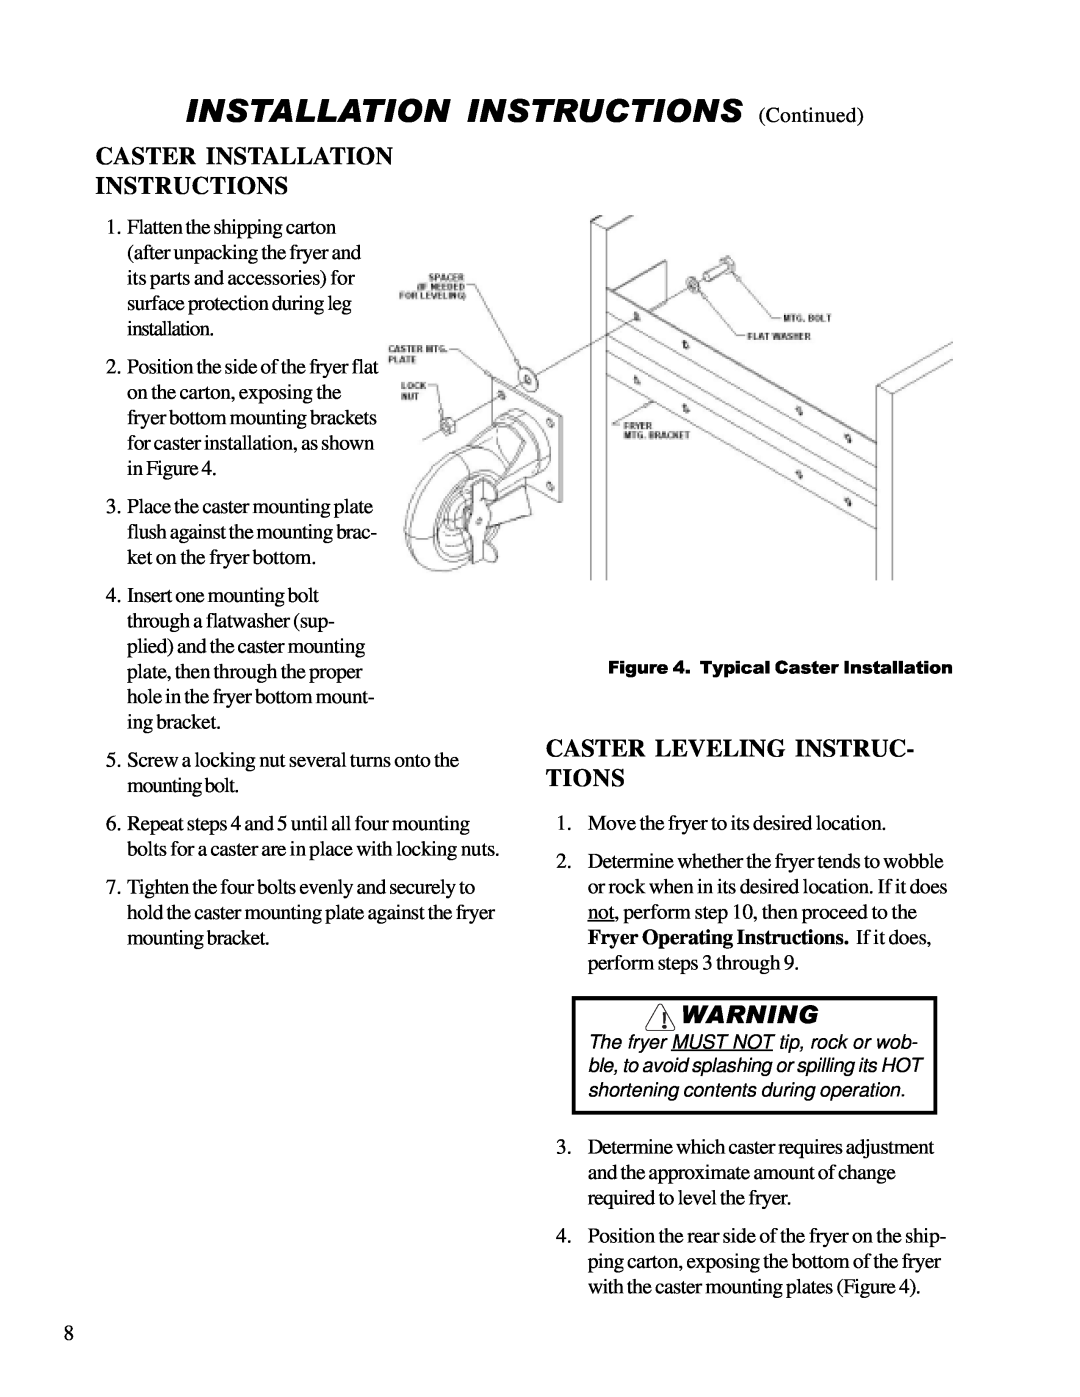 Anetsberger Brothers 14GS 14GU warranty INSTALLATION INSTRUCTIONS Continued, Caster Installation Instructions 